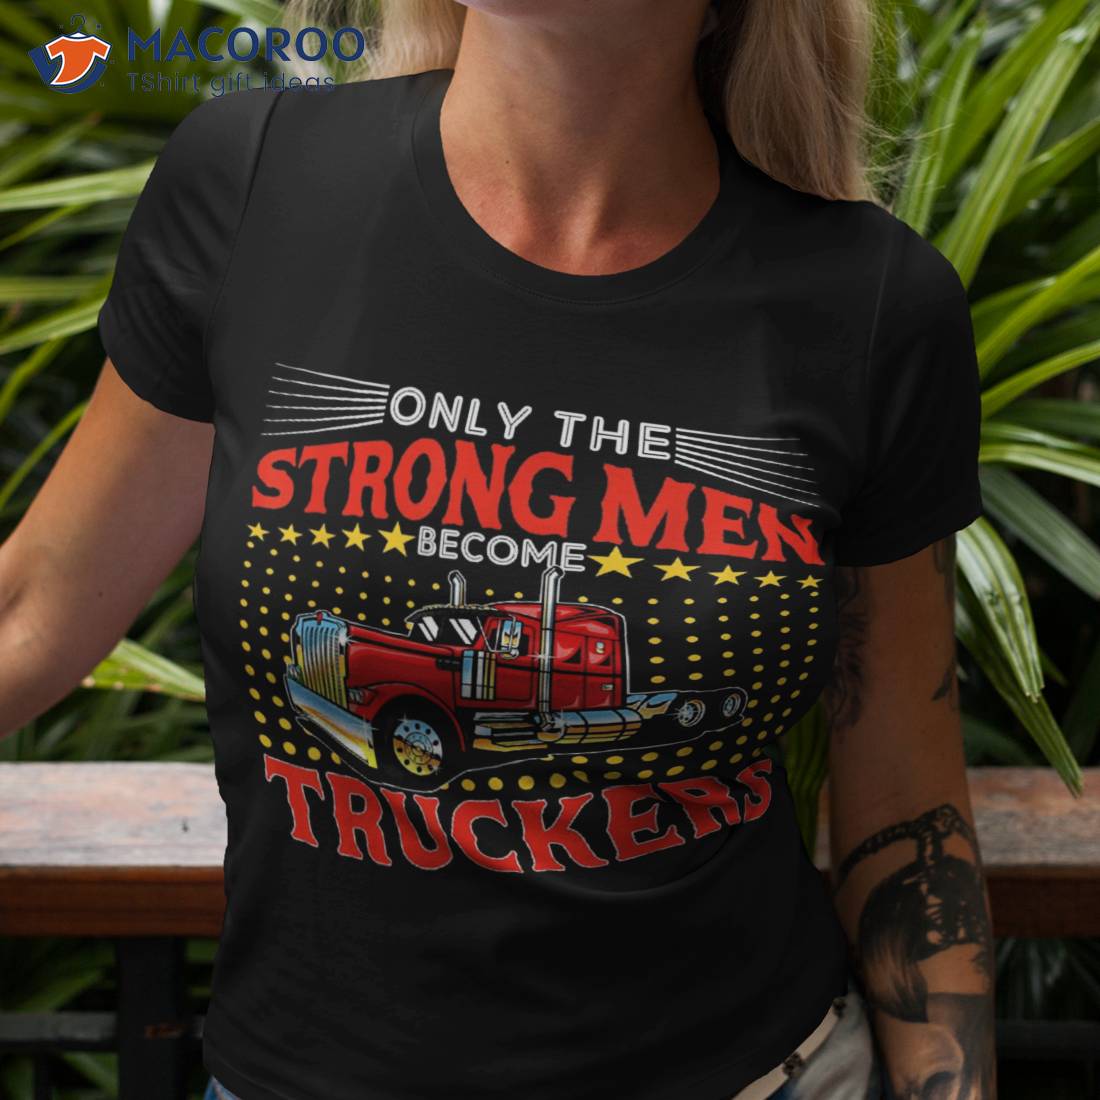 https://images.macoroo.com/wp-content/uploads/2023/04/vintage-only-strong-become-truckers-costume-proud-job-shirt-tshirt-3.jpg